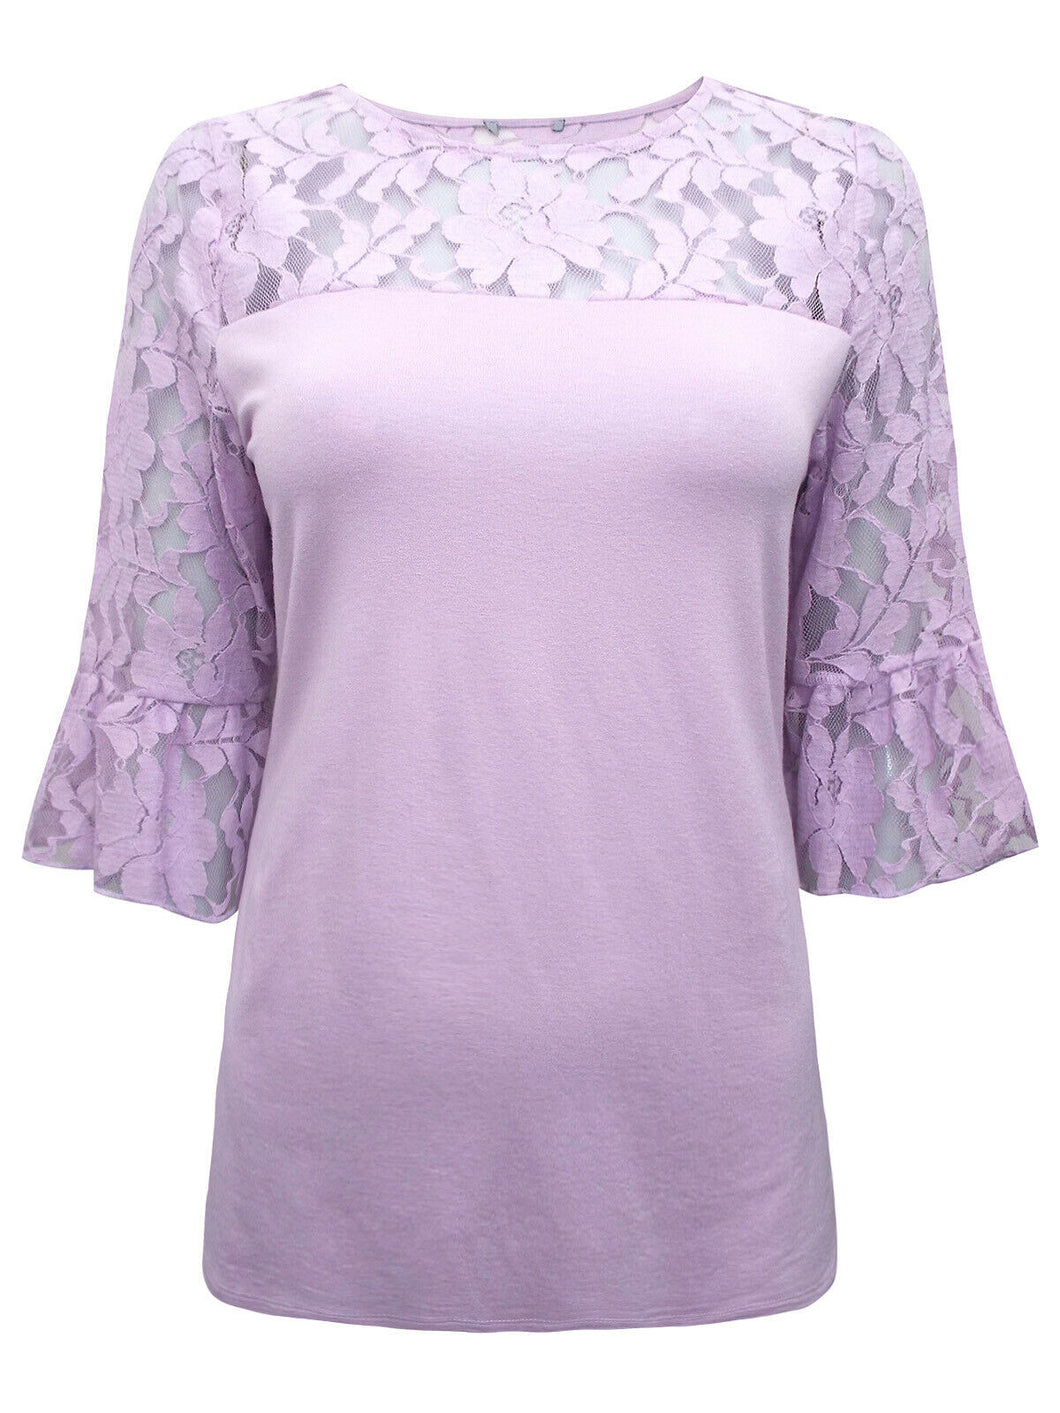 Lilac Floral Lace Insert Flare 3/4 length Sleeves